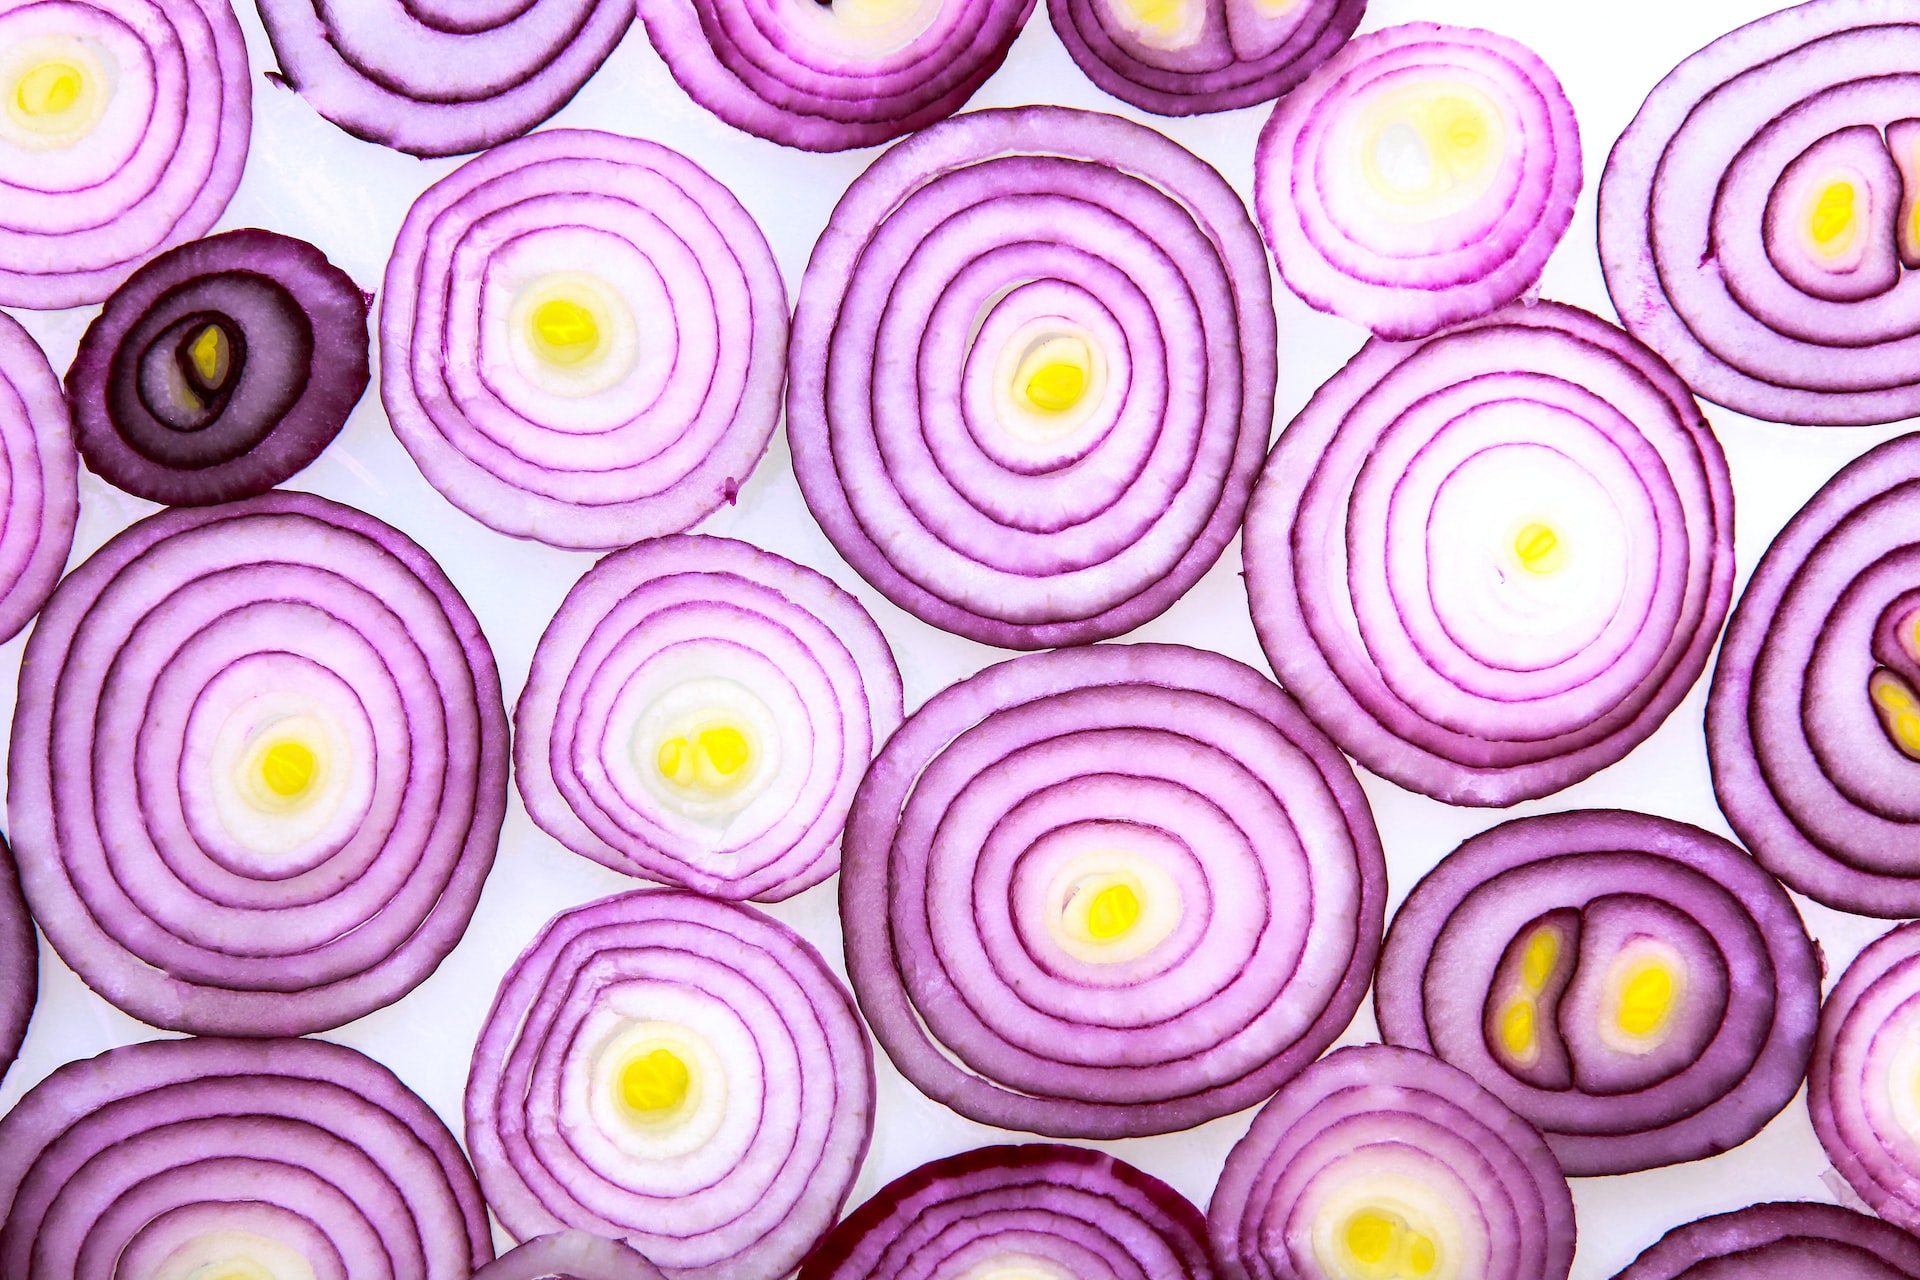 Why Do Onions Make You Cry?